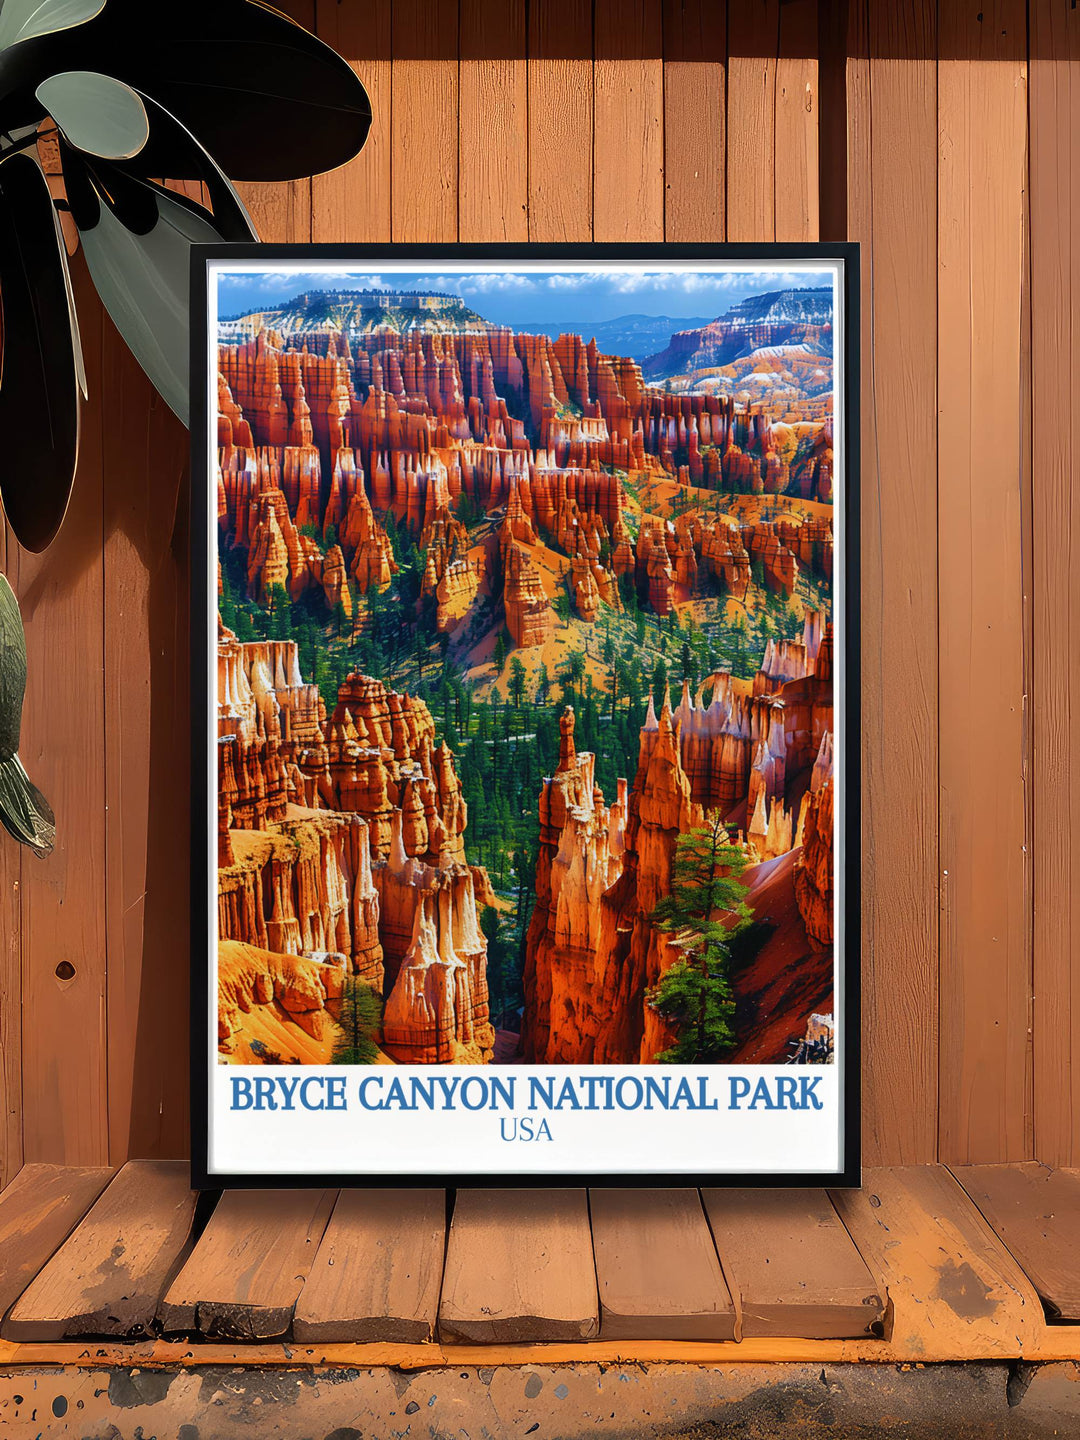 Bryce Canyon poster capturing the majestic landscapes of Bryce Amphitheater. A perfect piece for your home or office. This digital download allows you to print at home and enjoy the breathtaking scenery of Bryce Canyon immediately